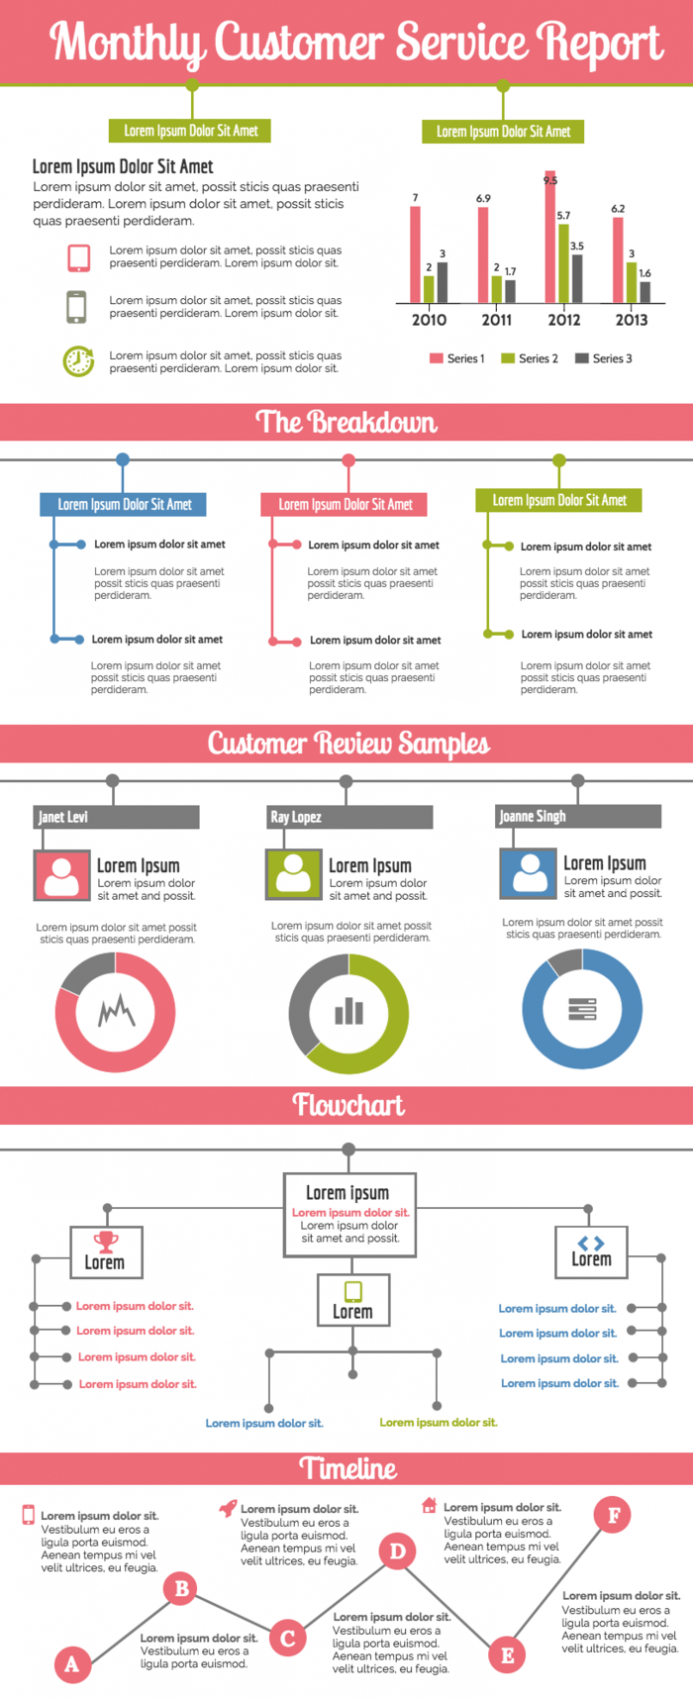 Monthly Customer Service Report Template throughout Service Review Report Template